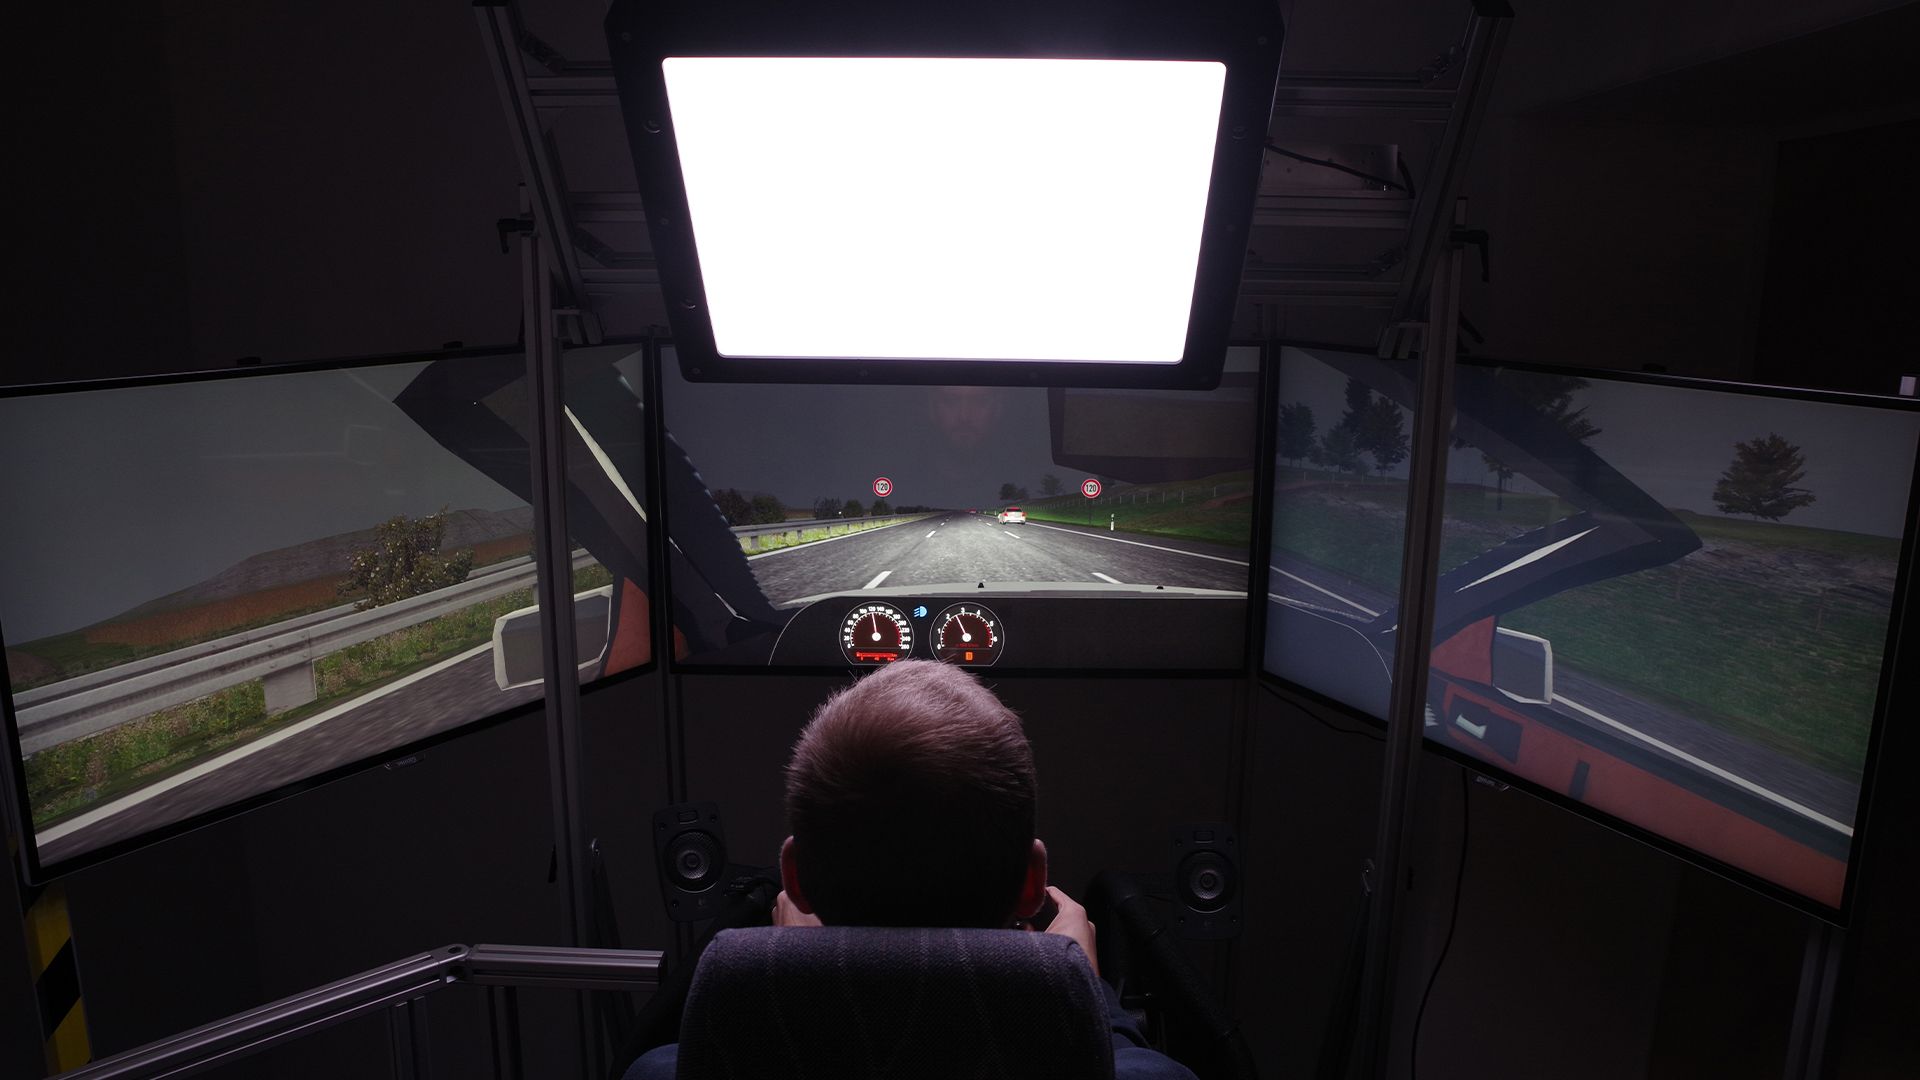 The driving simulator reproduces the effect of light when traveling in a car.